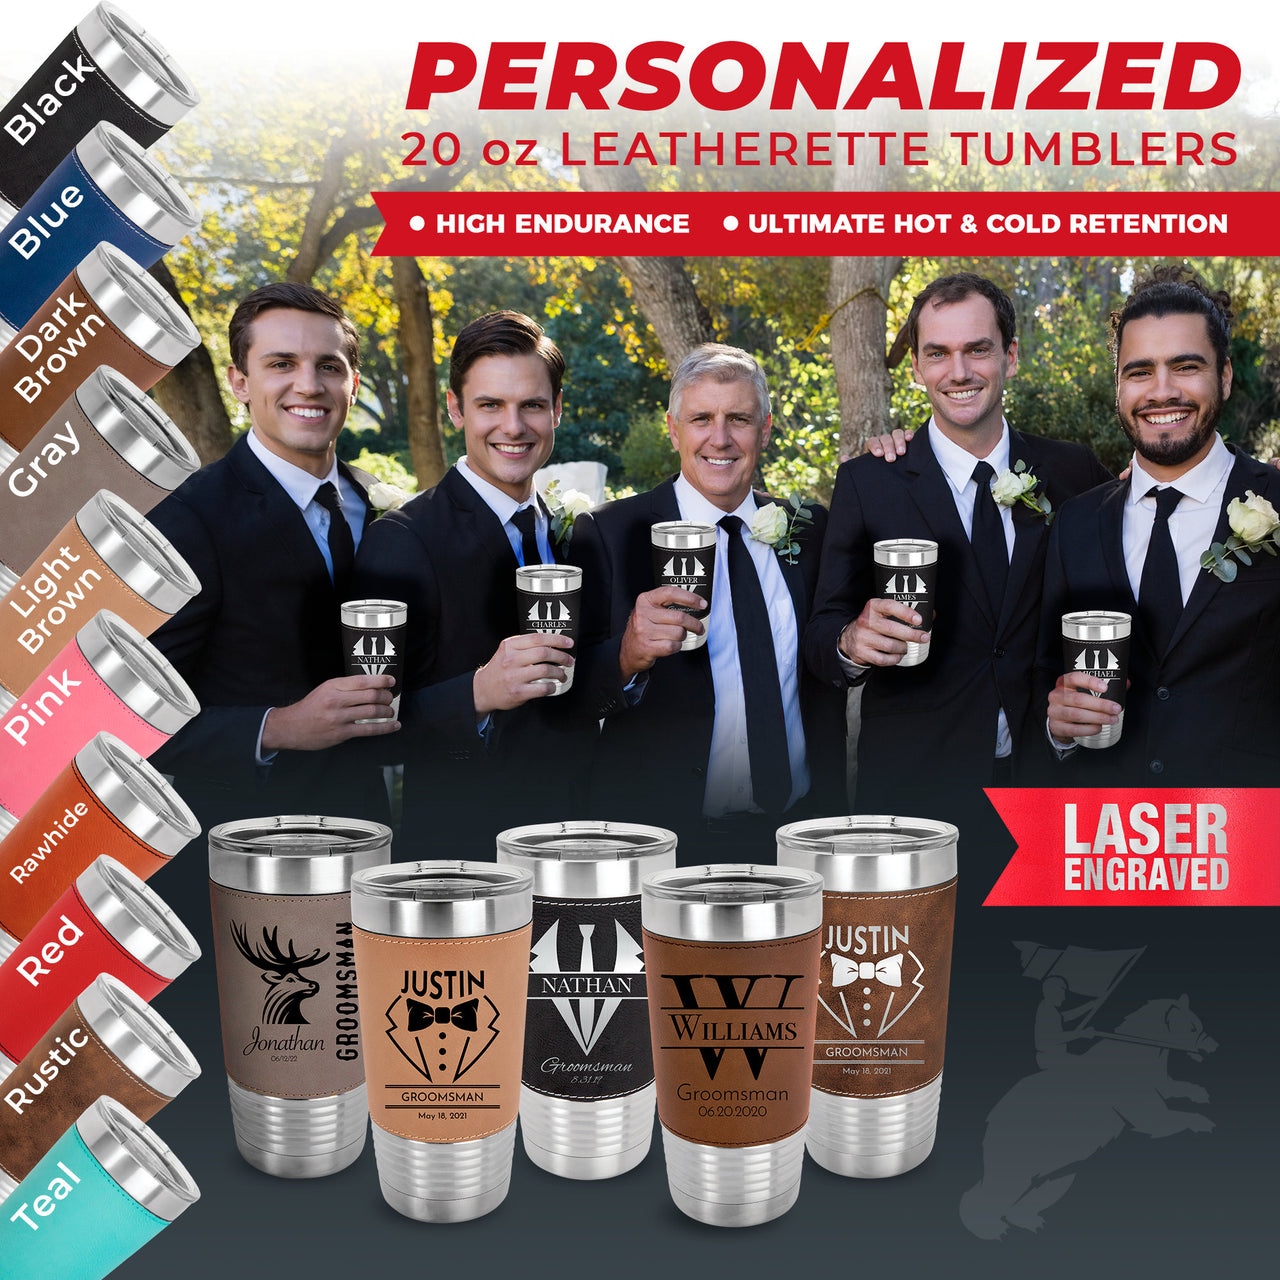 Personalized Bachelor Party Tumblers, Bachelor Party Gifts, Bachelor Party Favor Tumblers, Custom Tumbler Wedding Favors, Engraved Tumbler